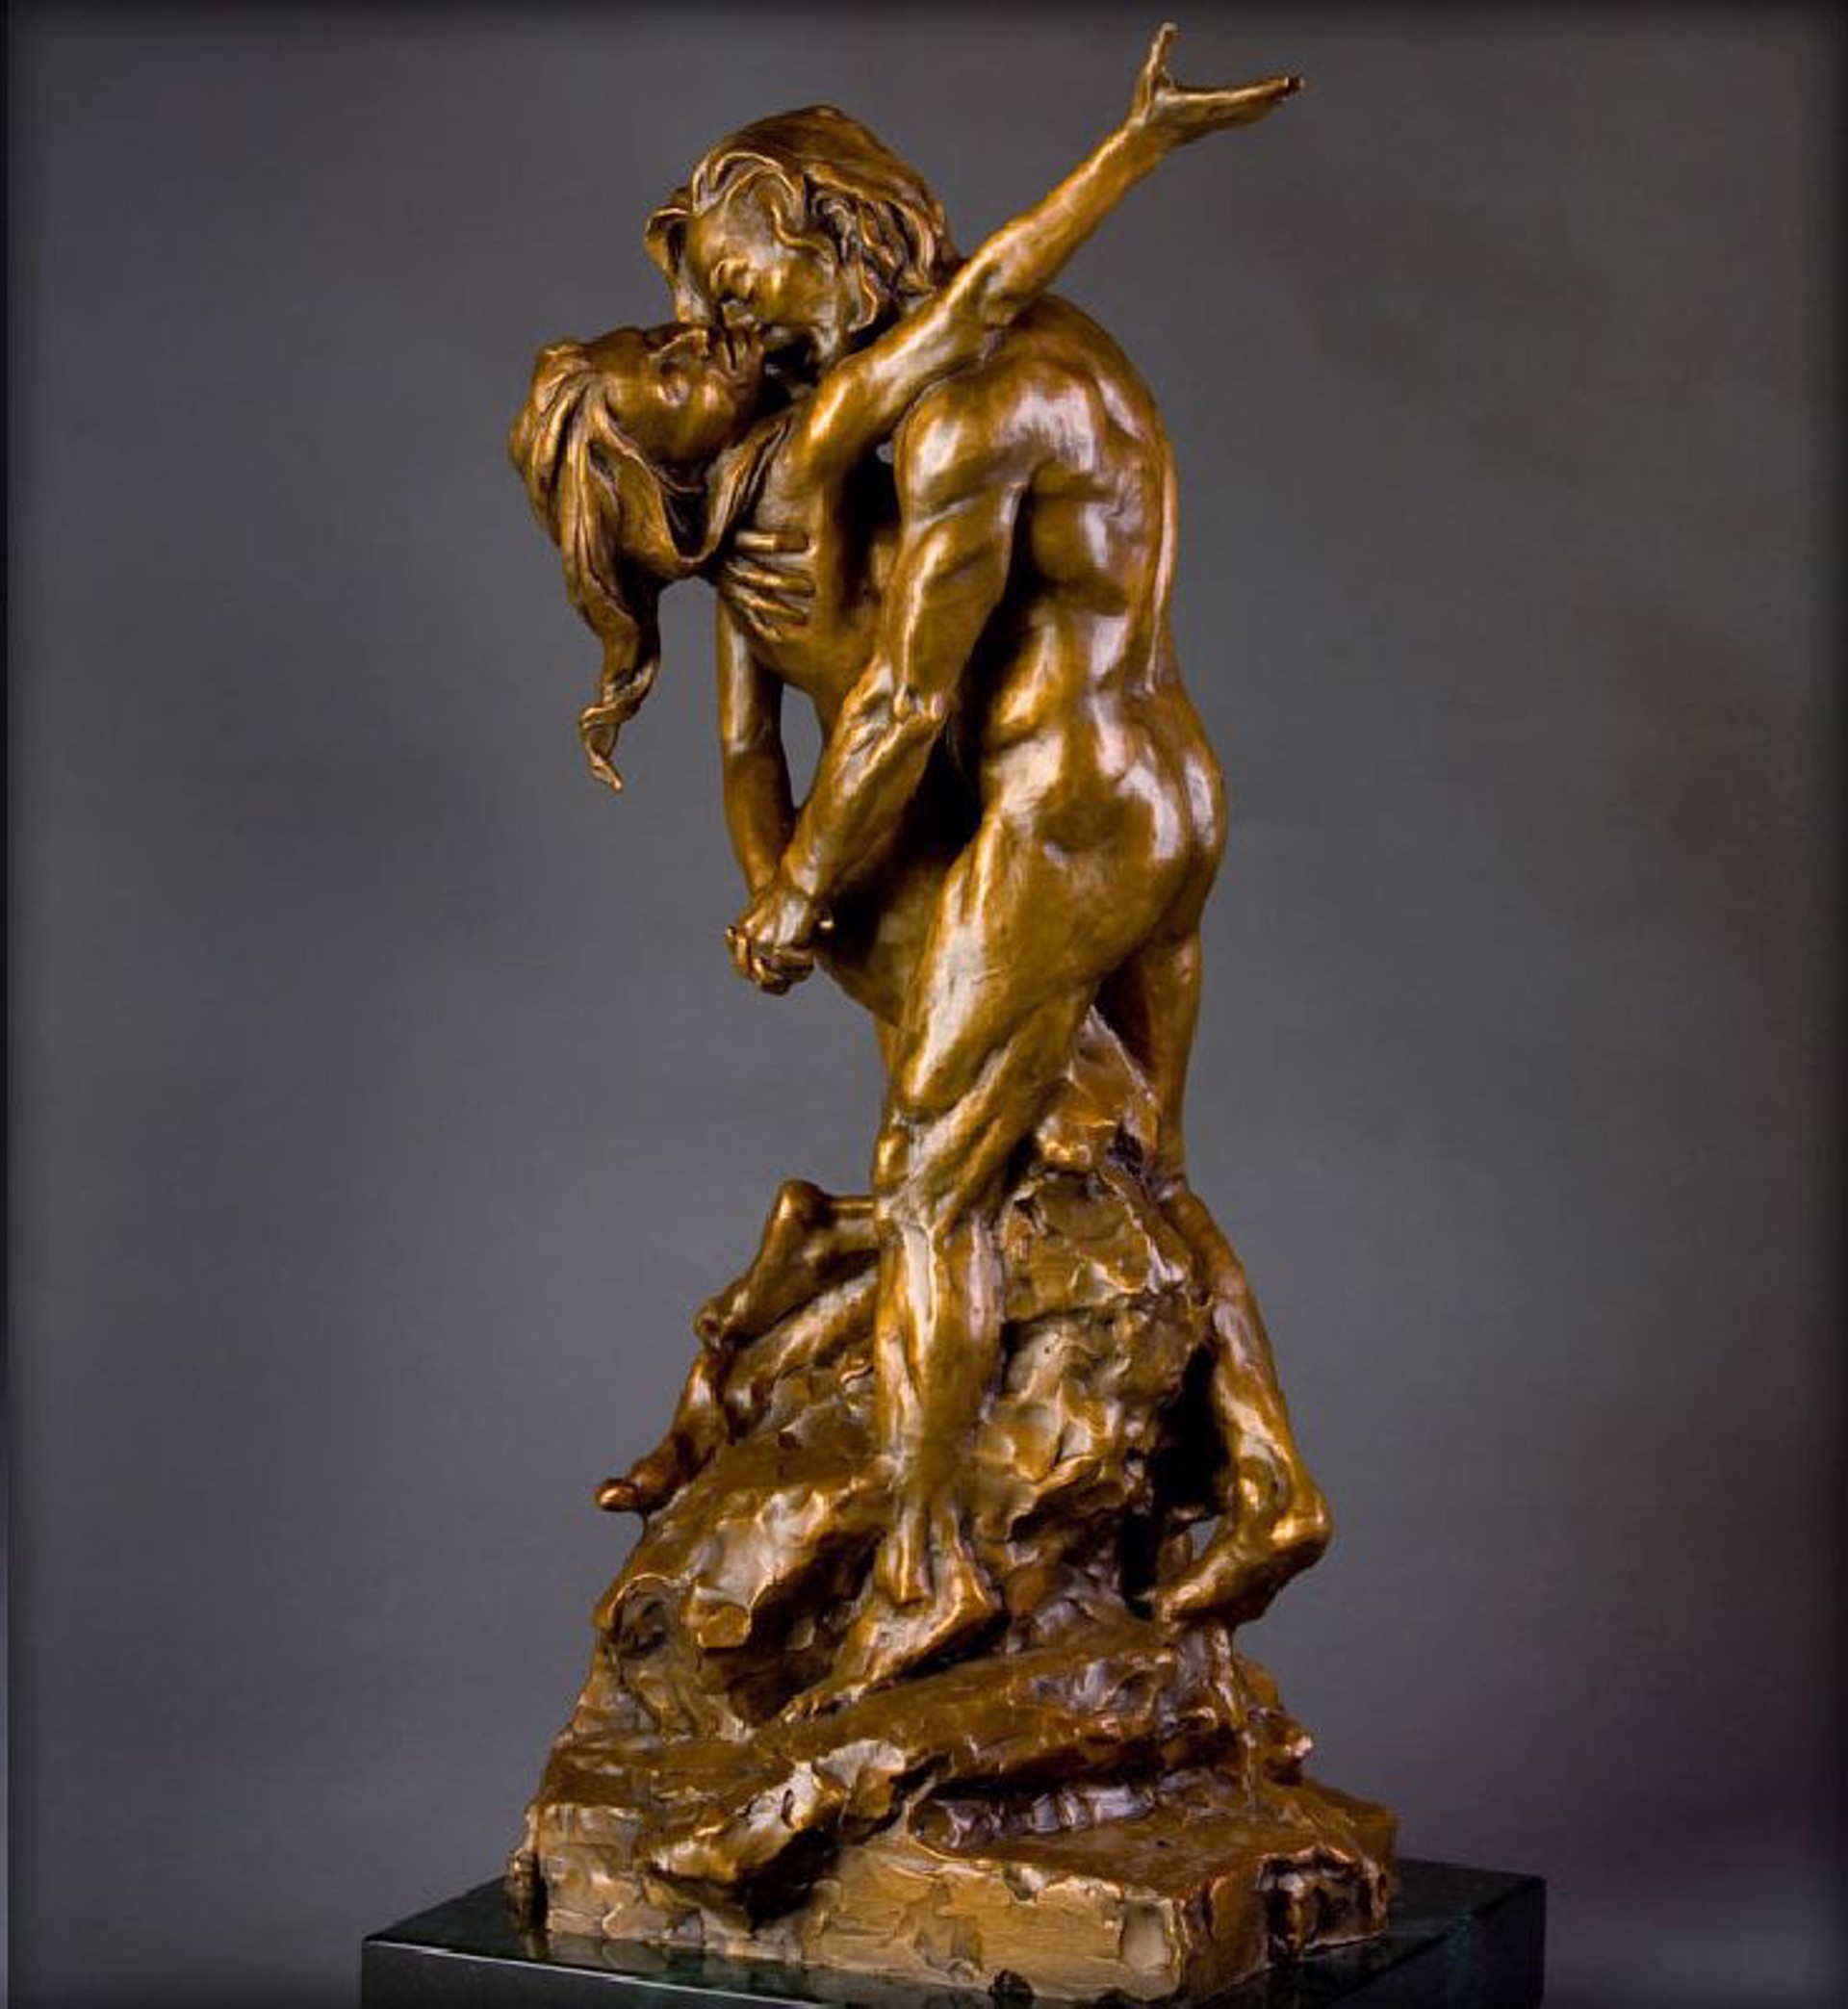 Passions by Gary Lee Price (sculptor)